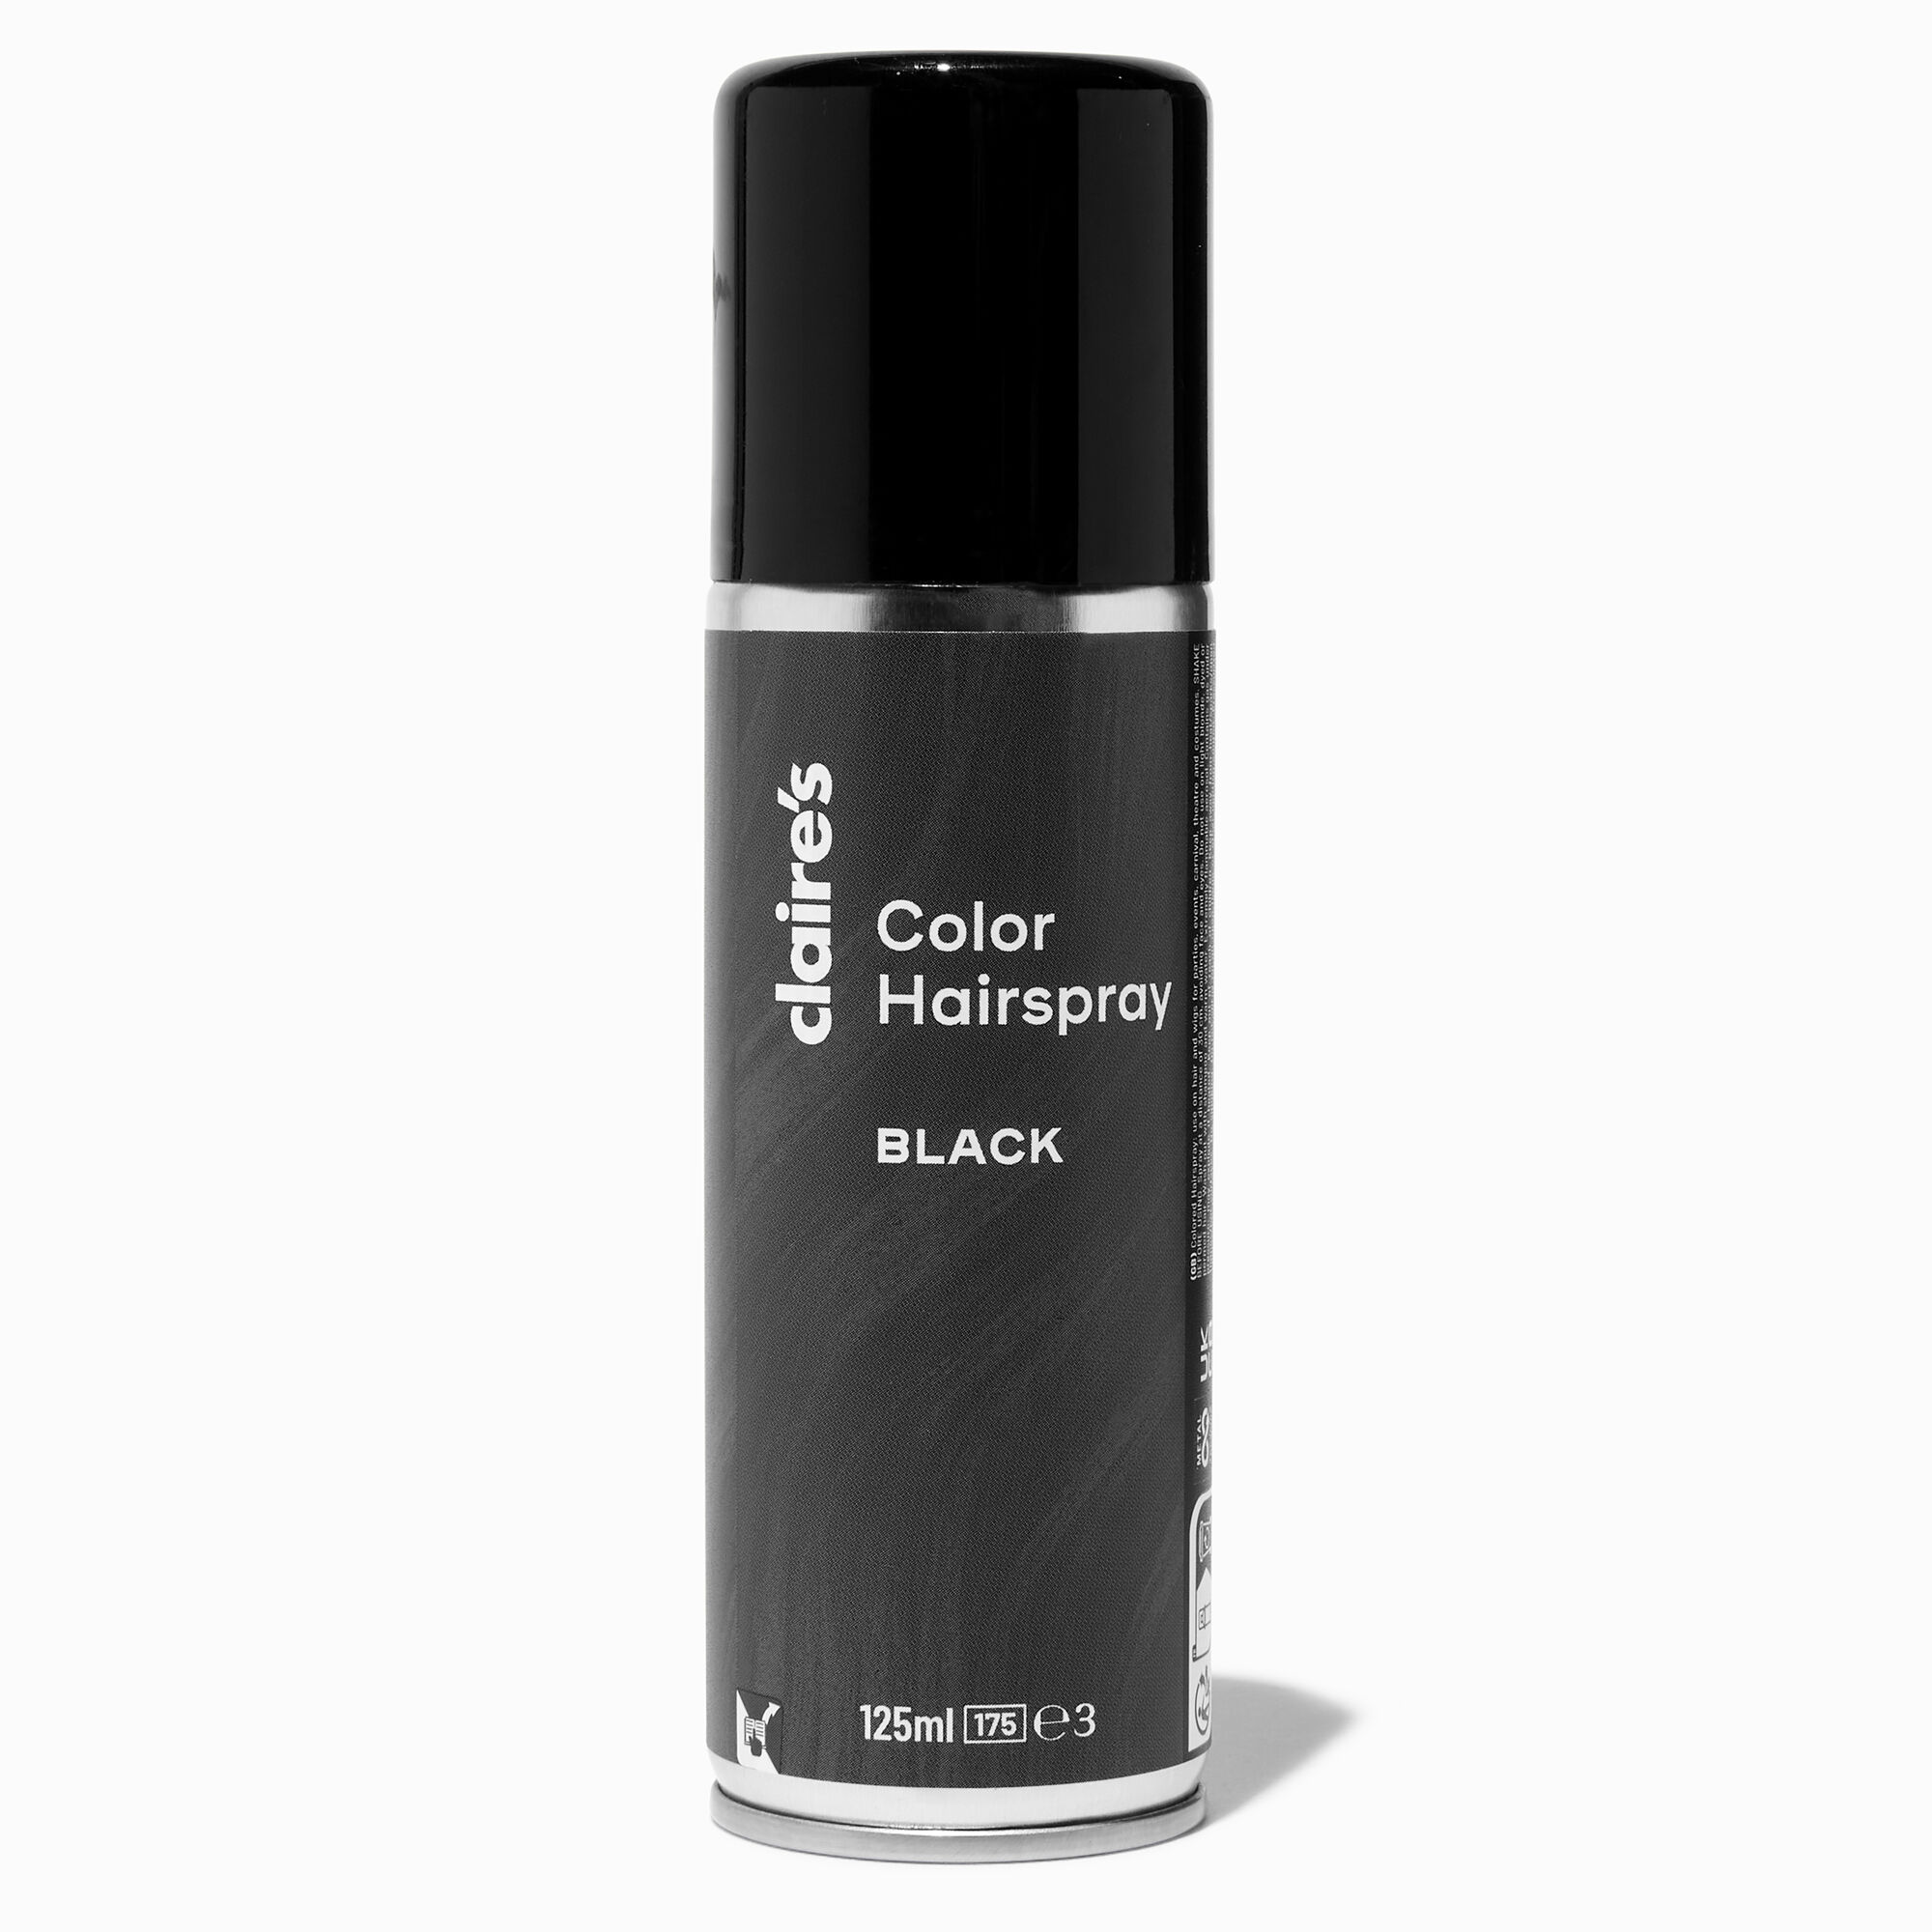 View Claires Colour Hairspray Black information